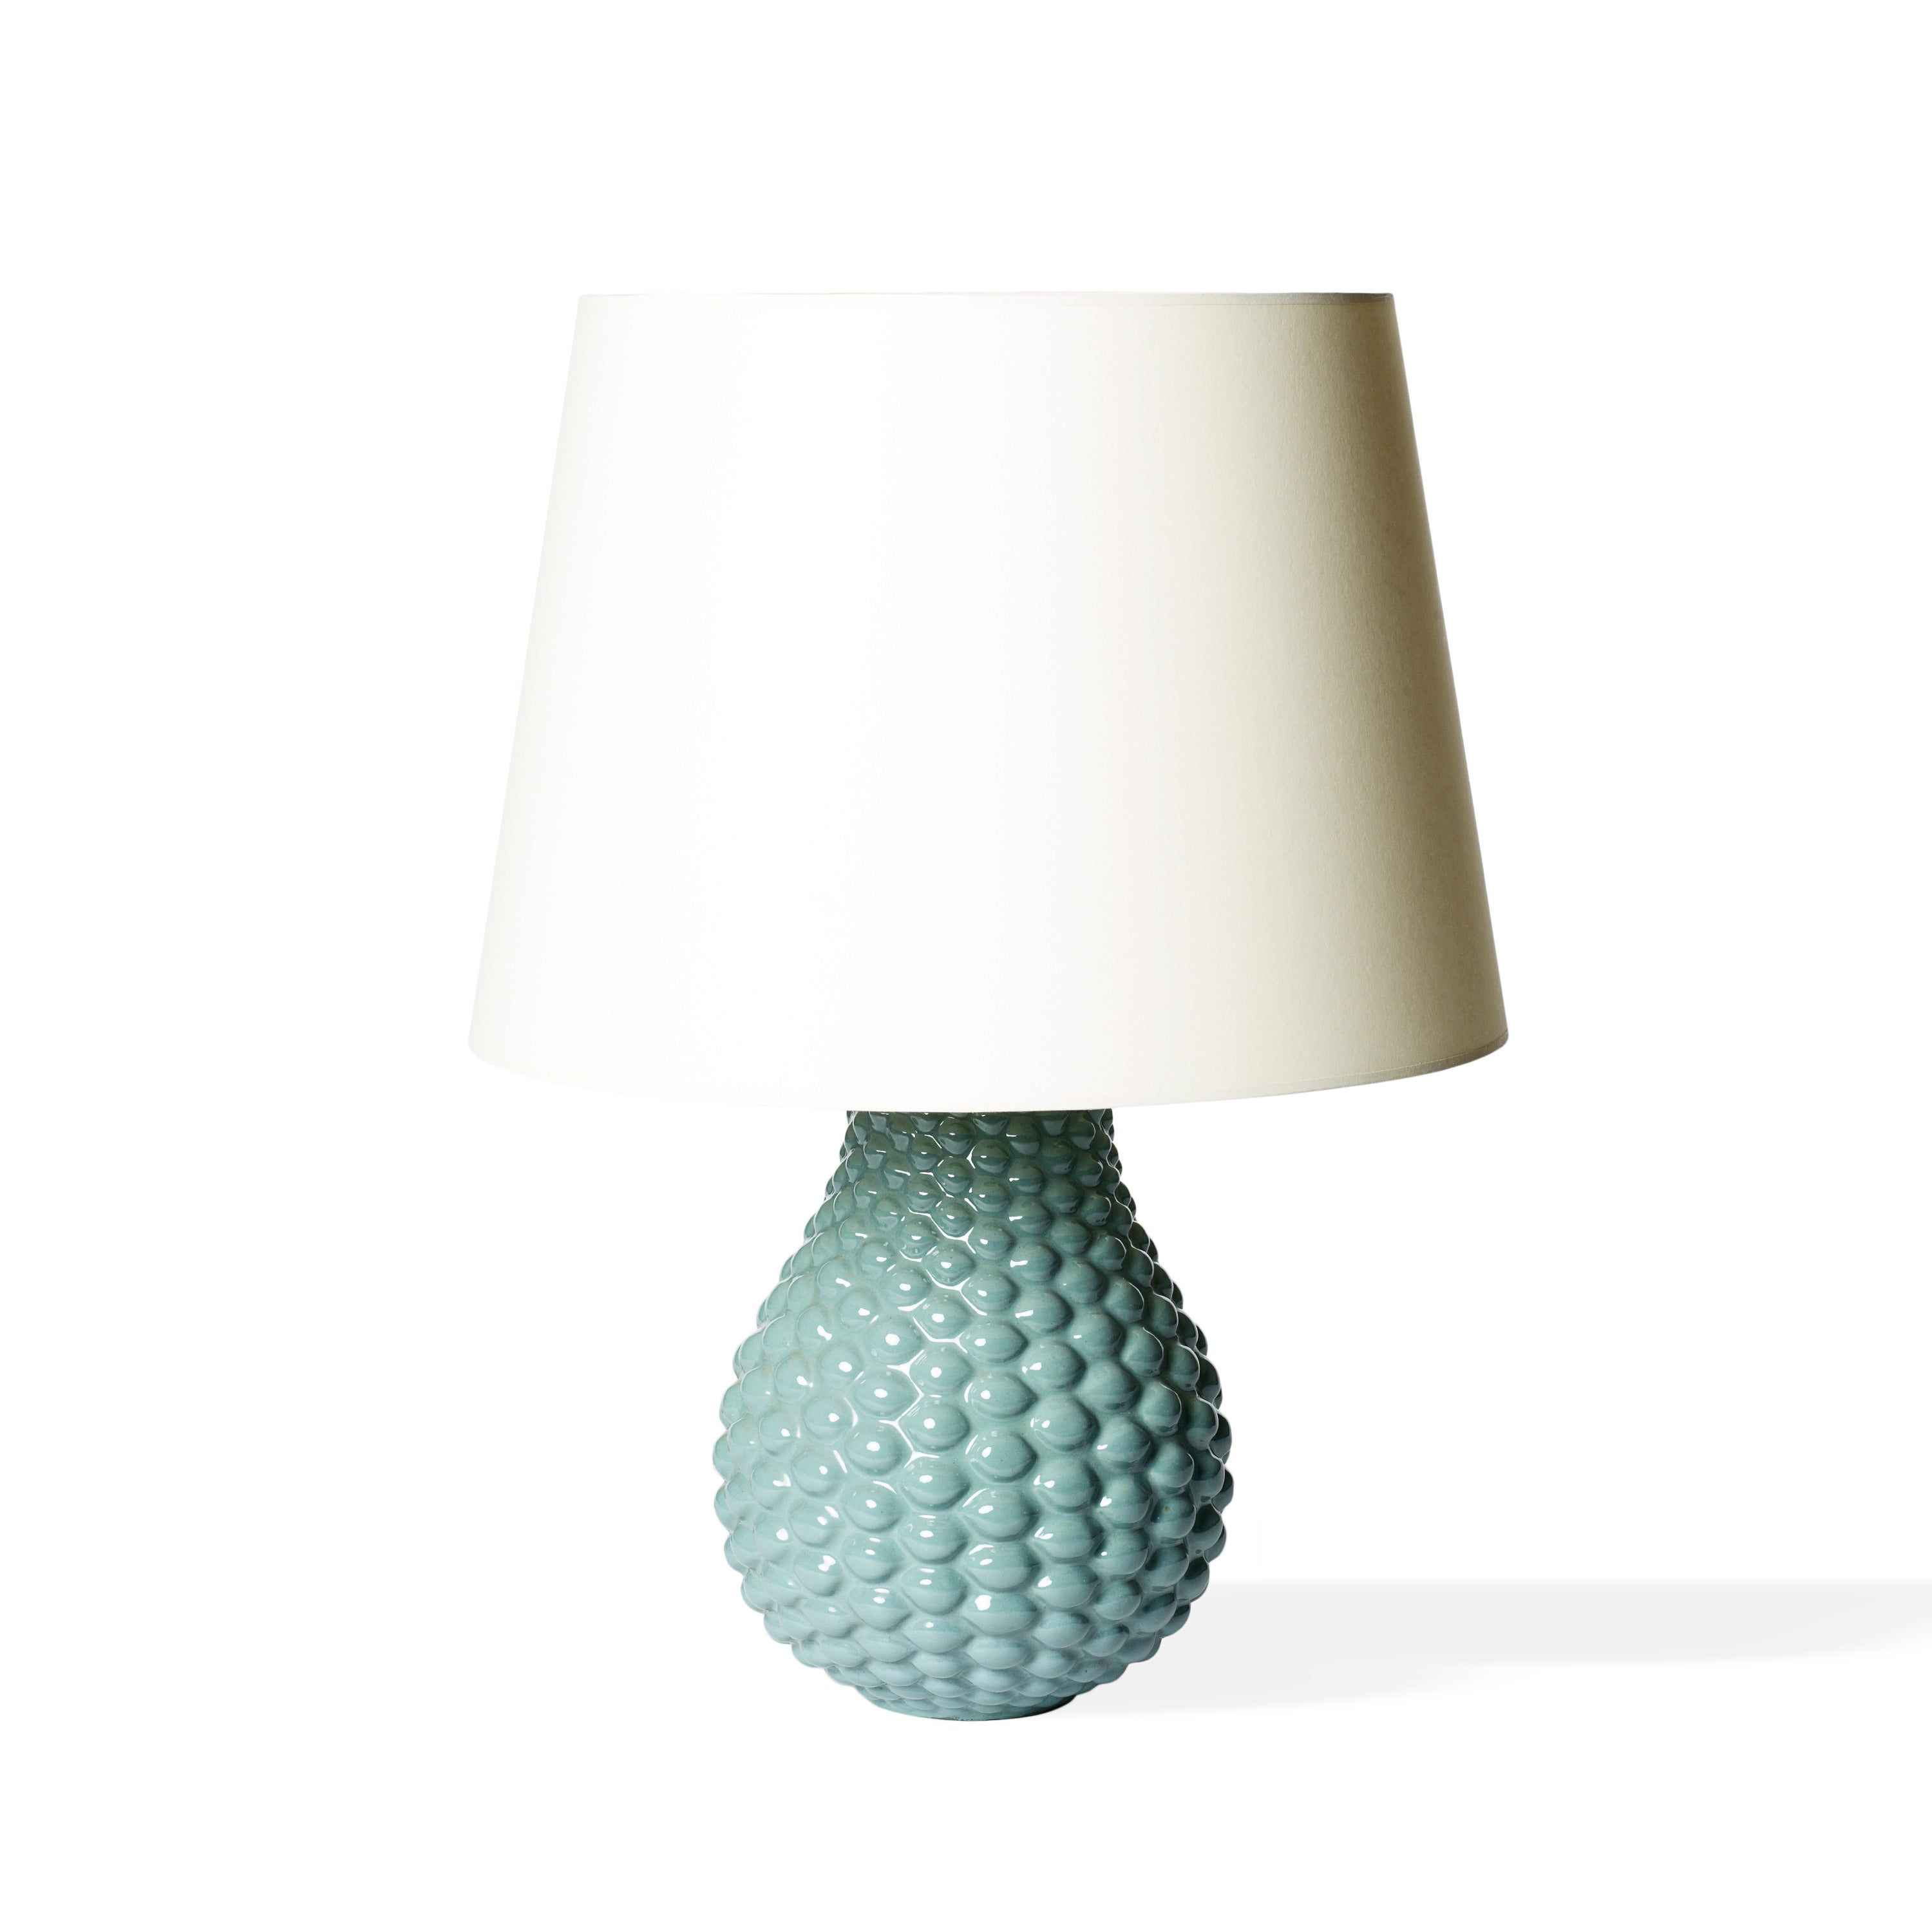 Rare "Budding Style" Table Lamp by Axel Salto For Sale